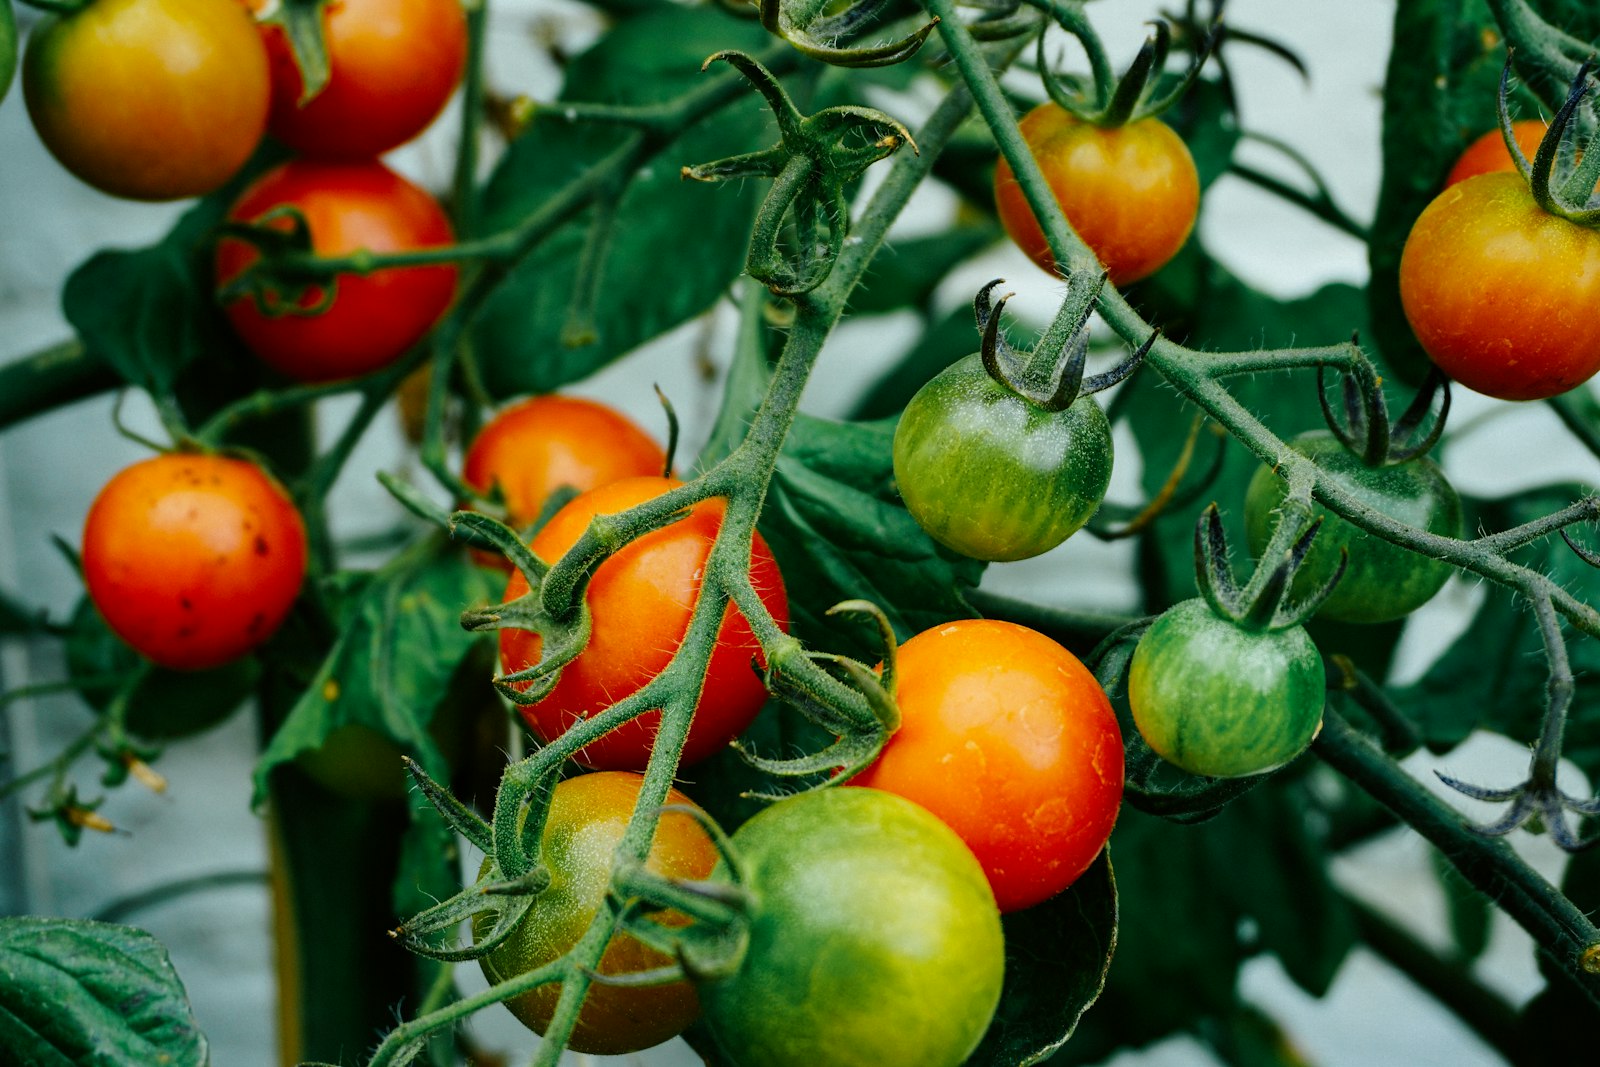 Sony a6000 sample photo. Tomatoes hanging on tomato photography